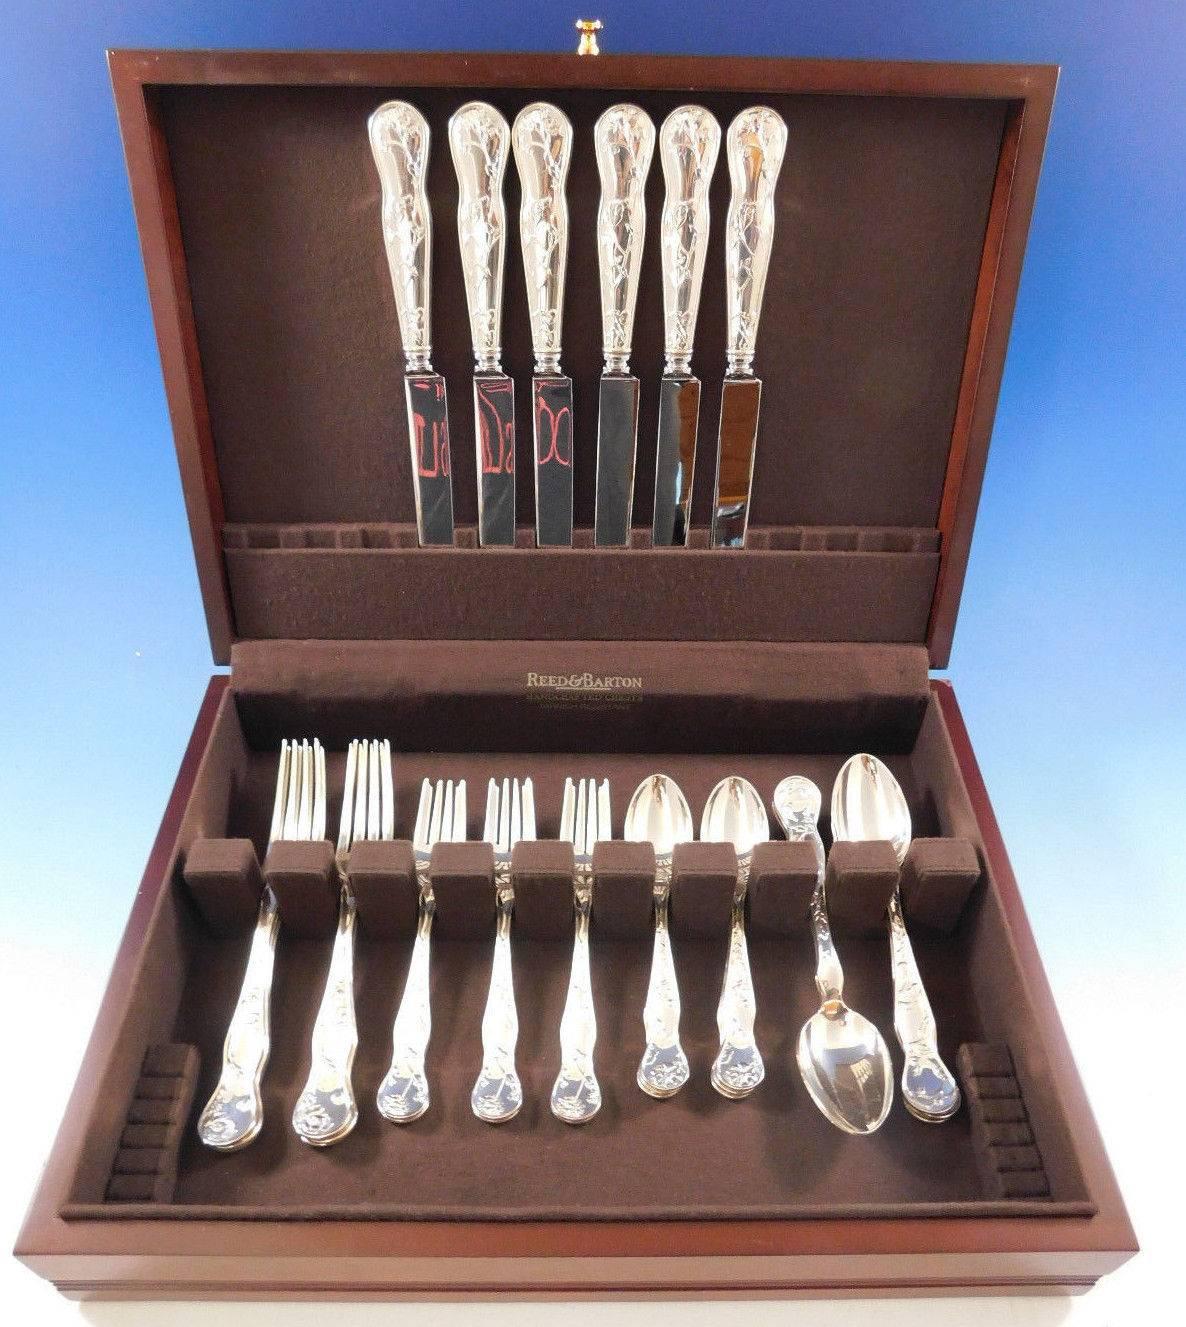 Stunning dinner size American garden by Tiffany and Co. sterling silver flatware set 30 pieces. This set includes:

Six dinner size knives, 10 1/4